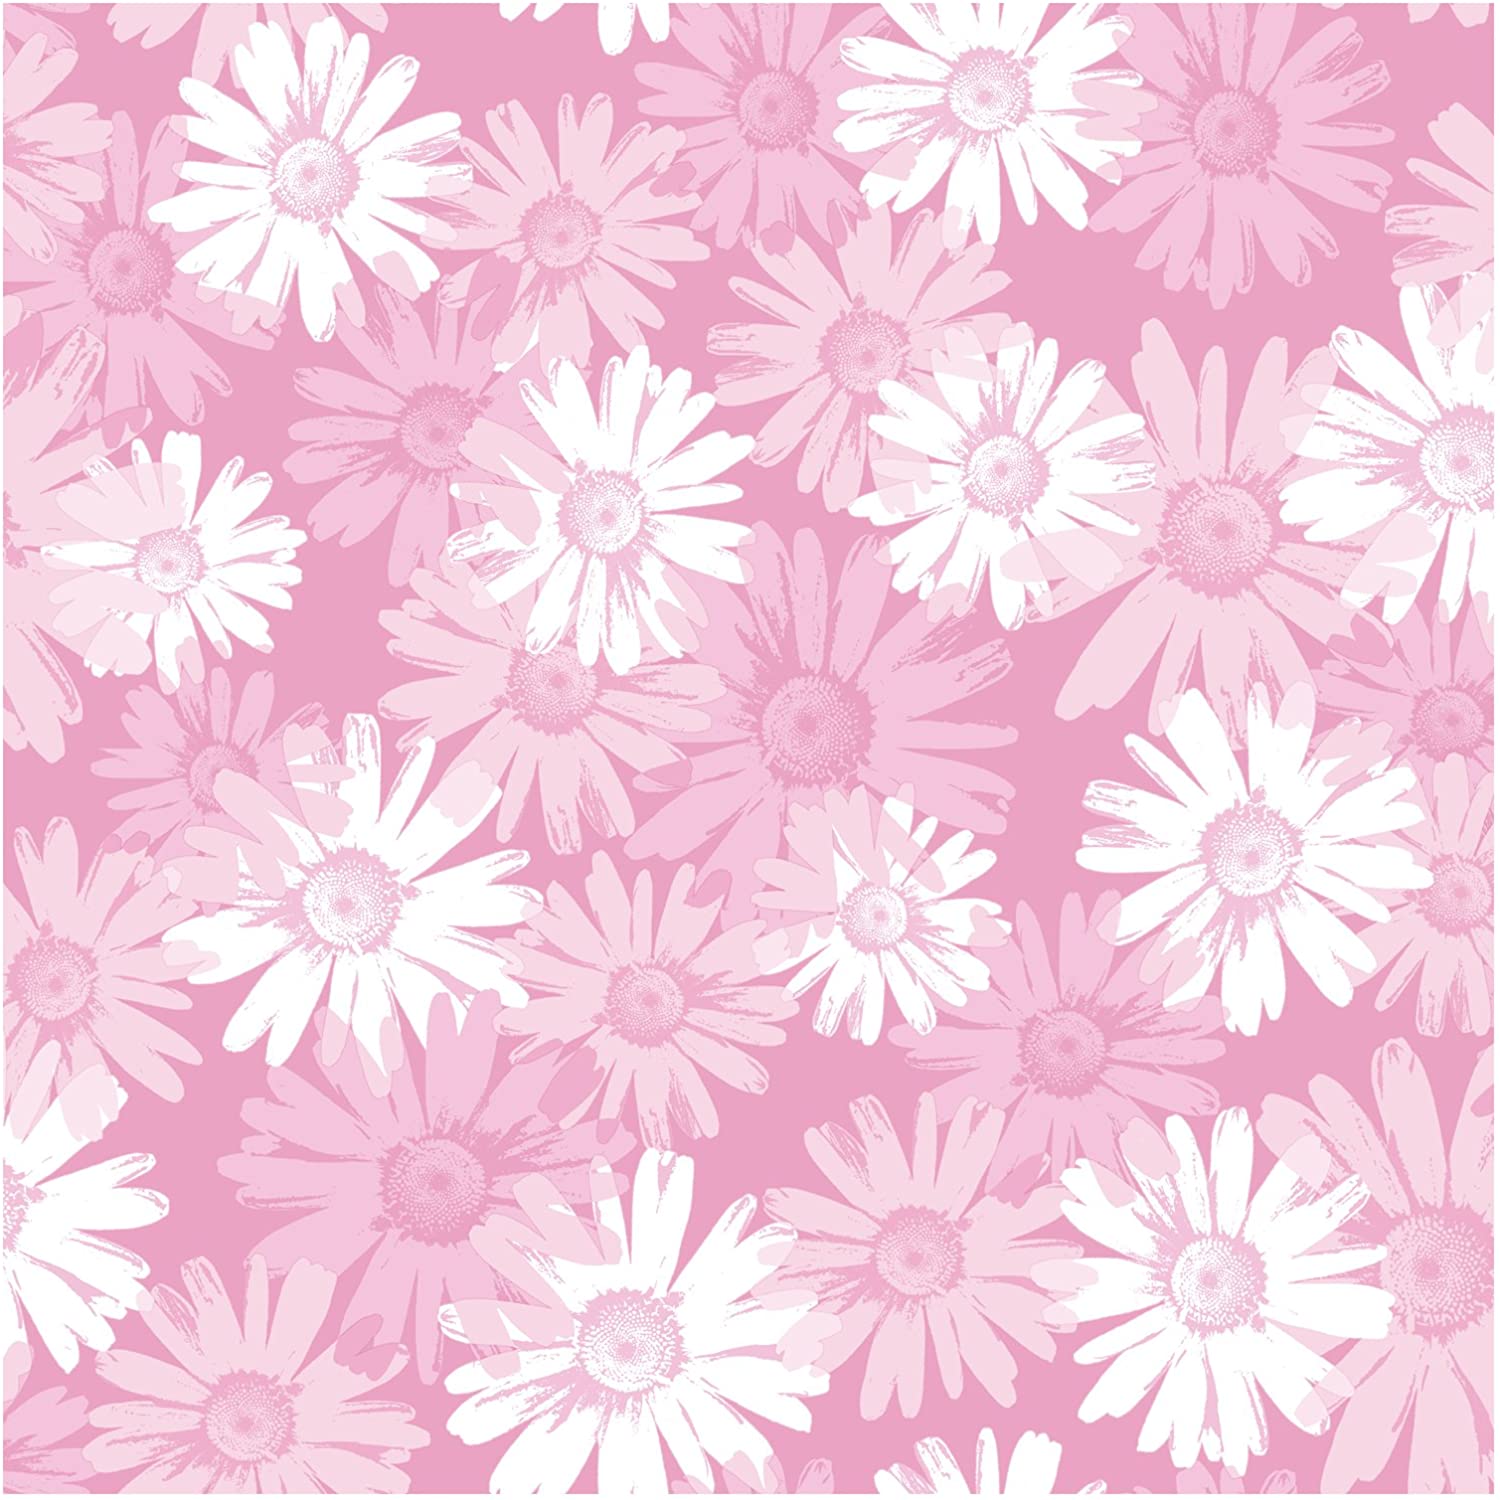 York Wallcoverings BT2736SMP Daisy Camo 8 X 10 Wallpaper Memo Sample, Bubble Gum Pink Carnation Pink Bright White